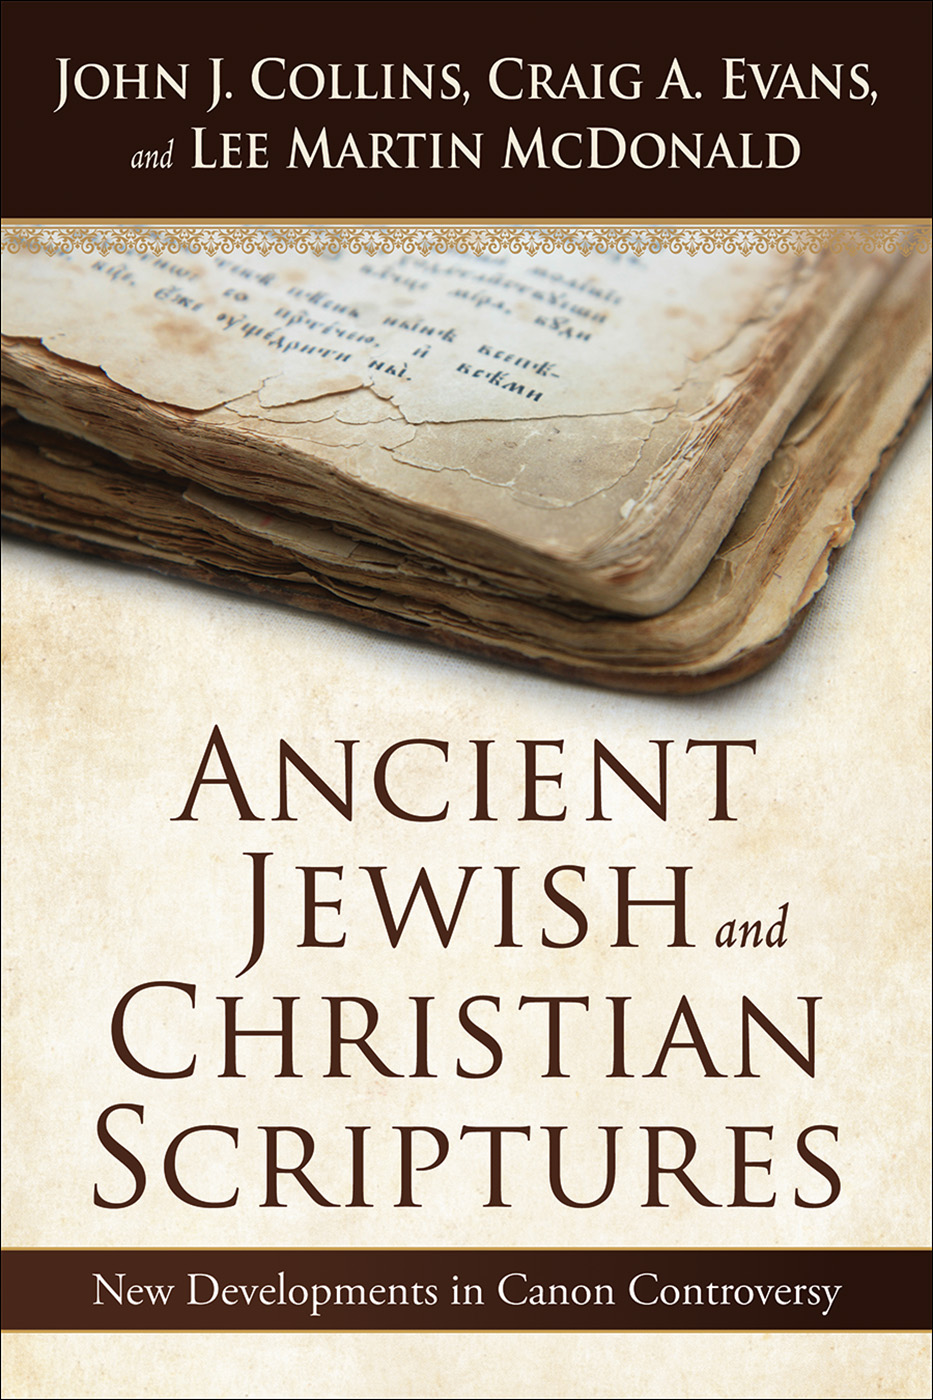 Ancient Jewish and Christian Scriptures